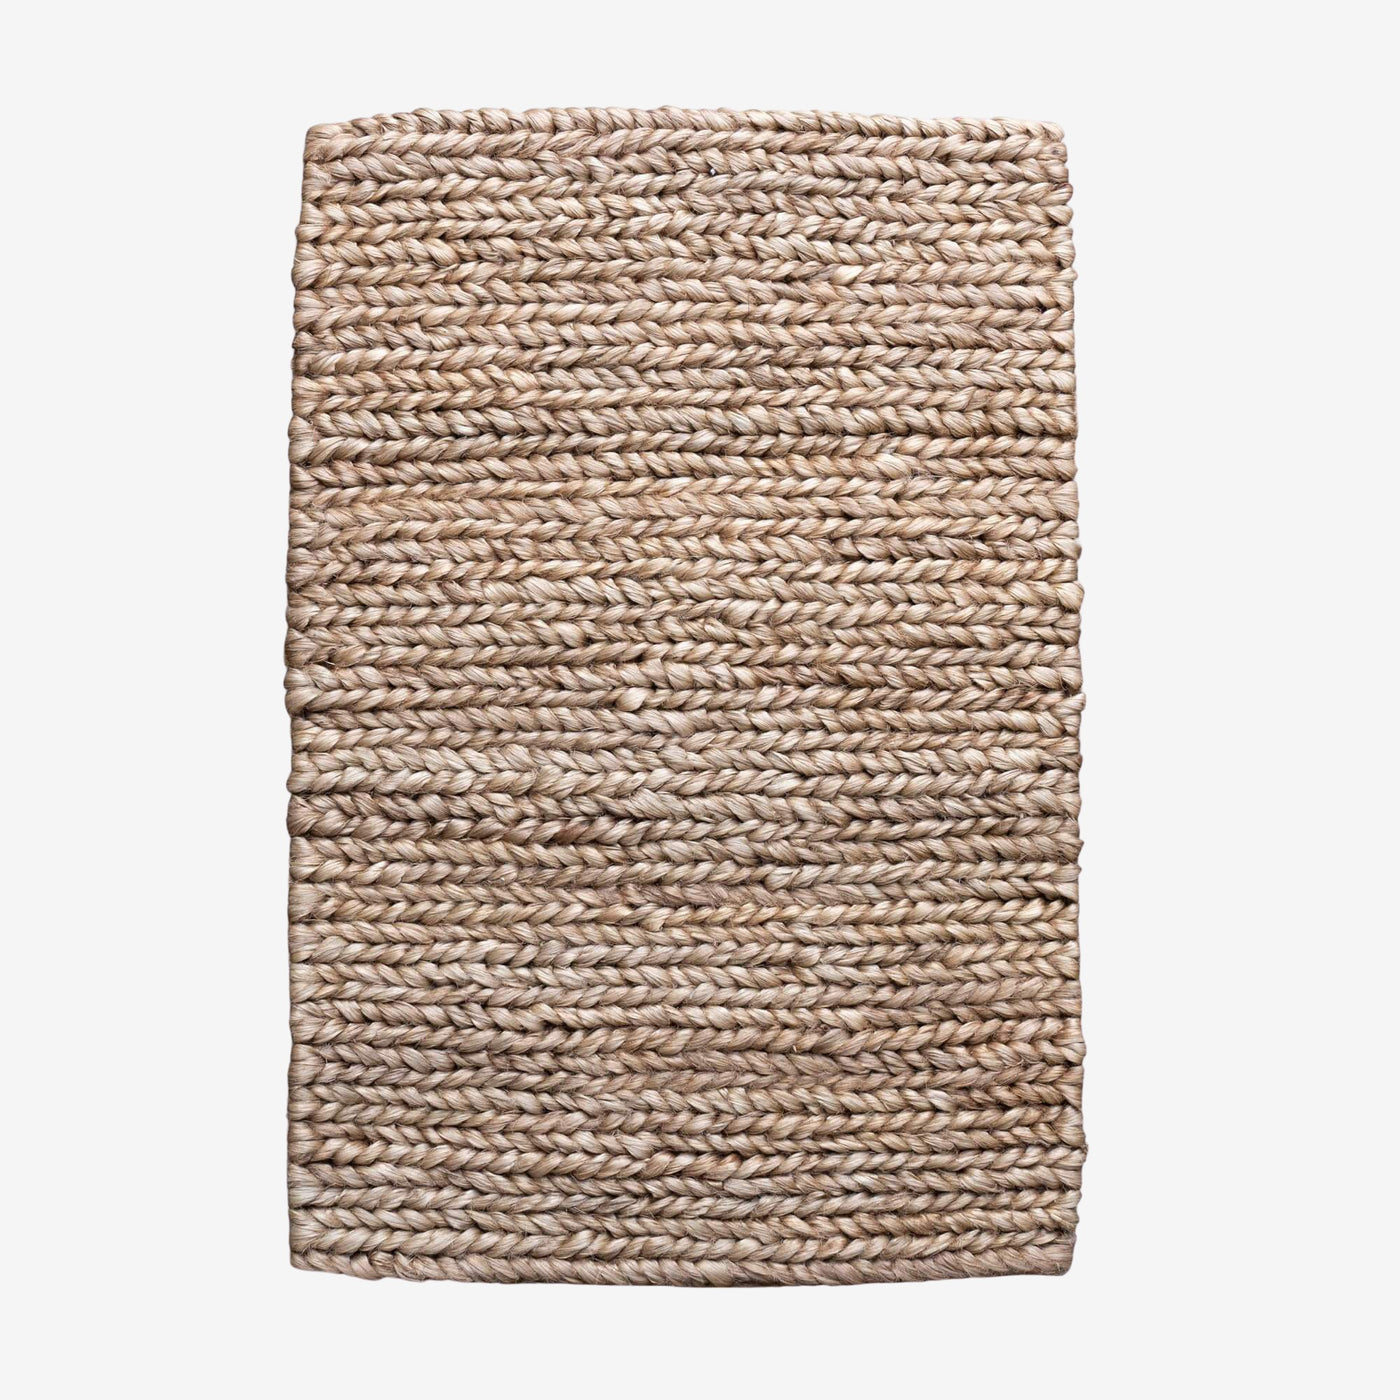 Jute Knit, Luxury Carpet Made In India, Designed by Modern Relik